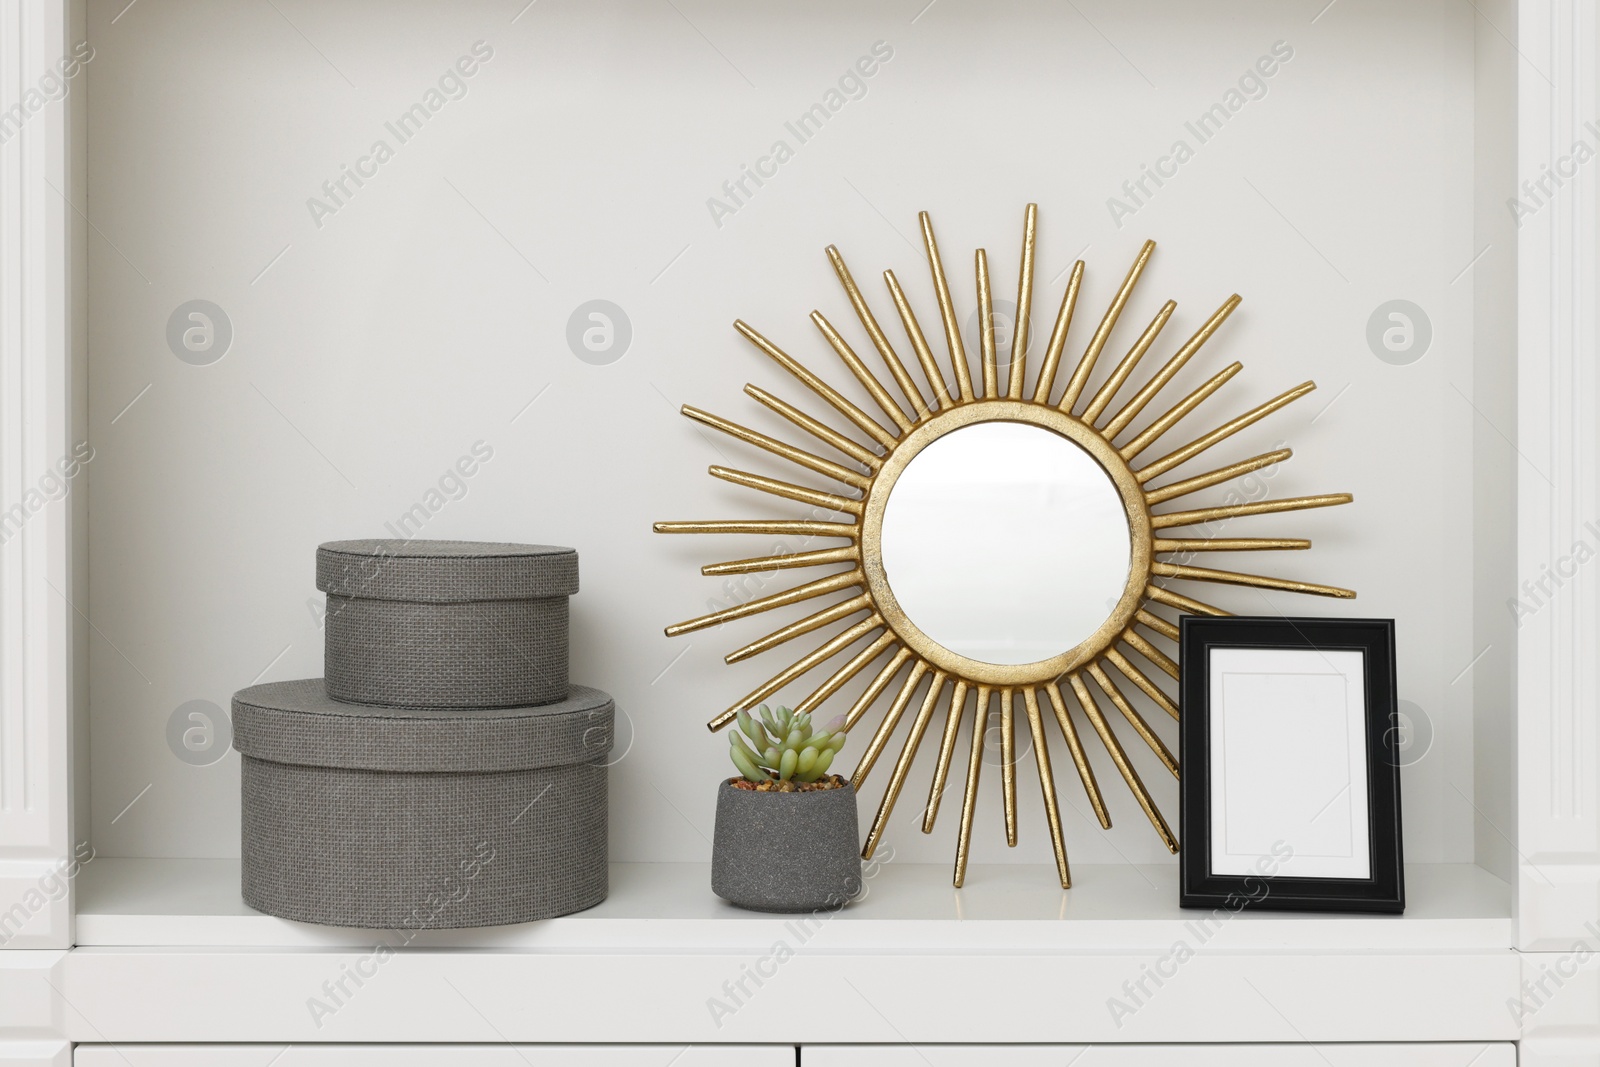 Photo of Grey decorative boxes, houseplant, mirror and frame on shelving unit